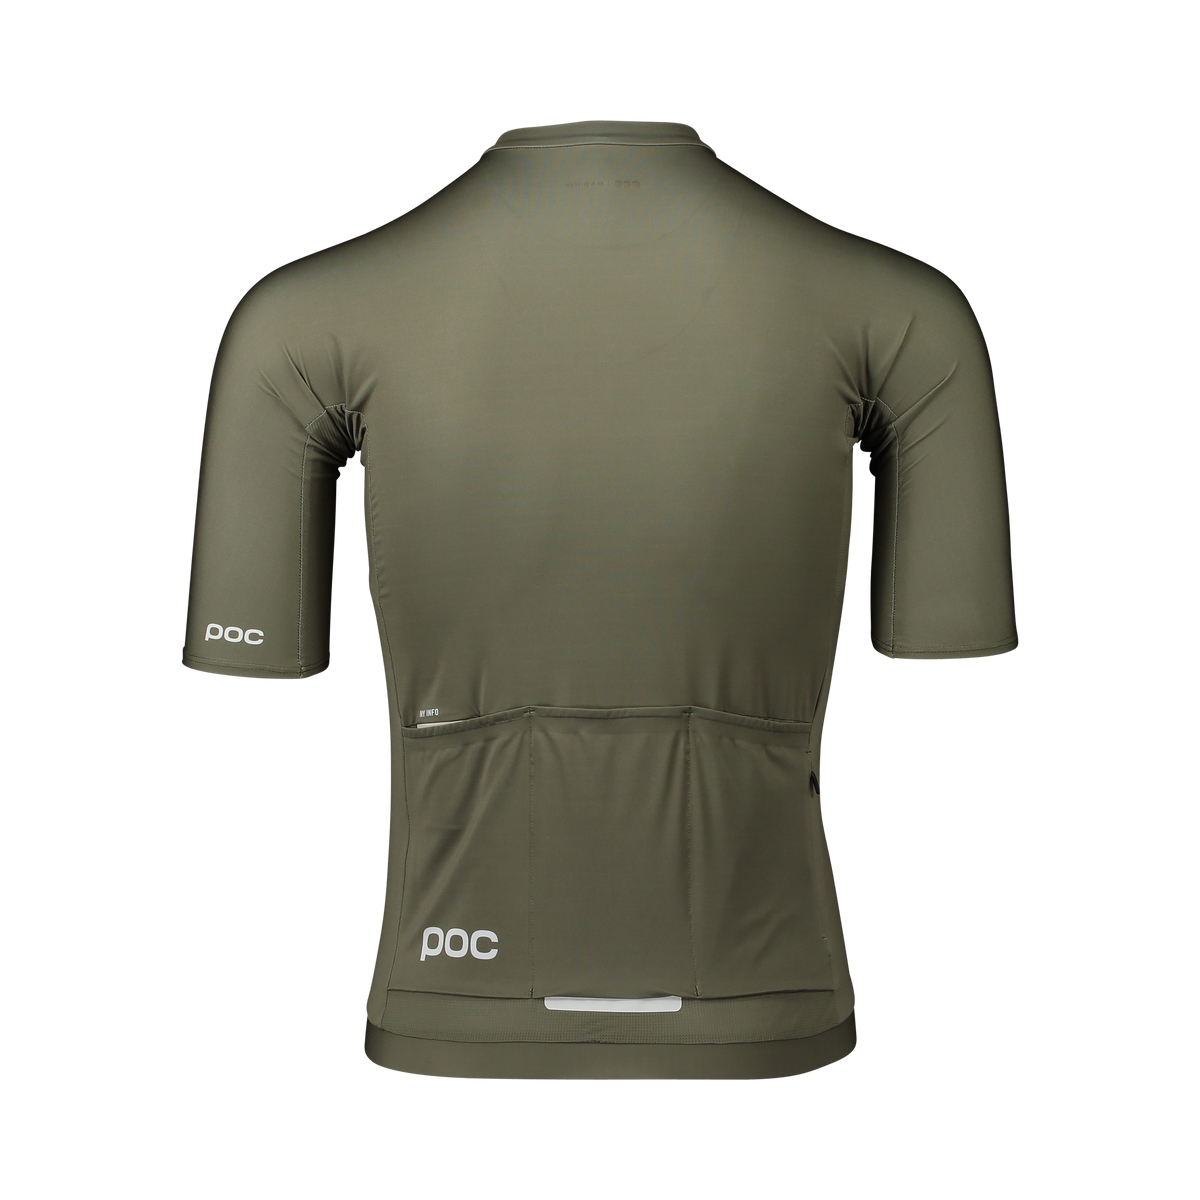 Men's cycling jerseys – The Cyclist